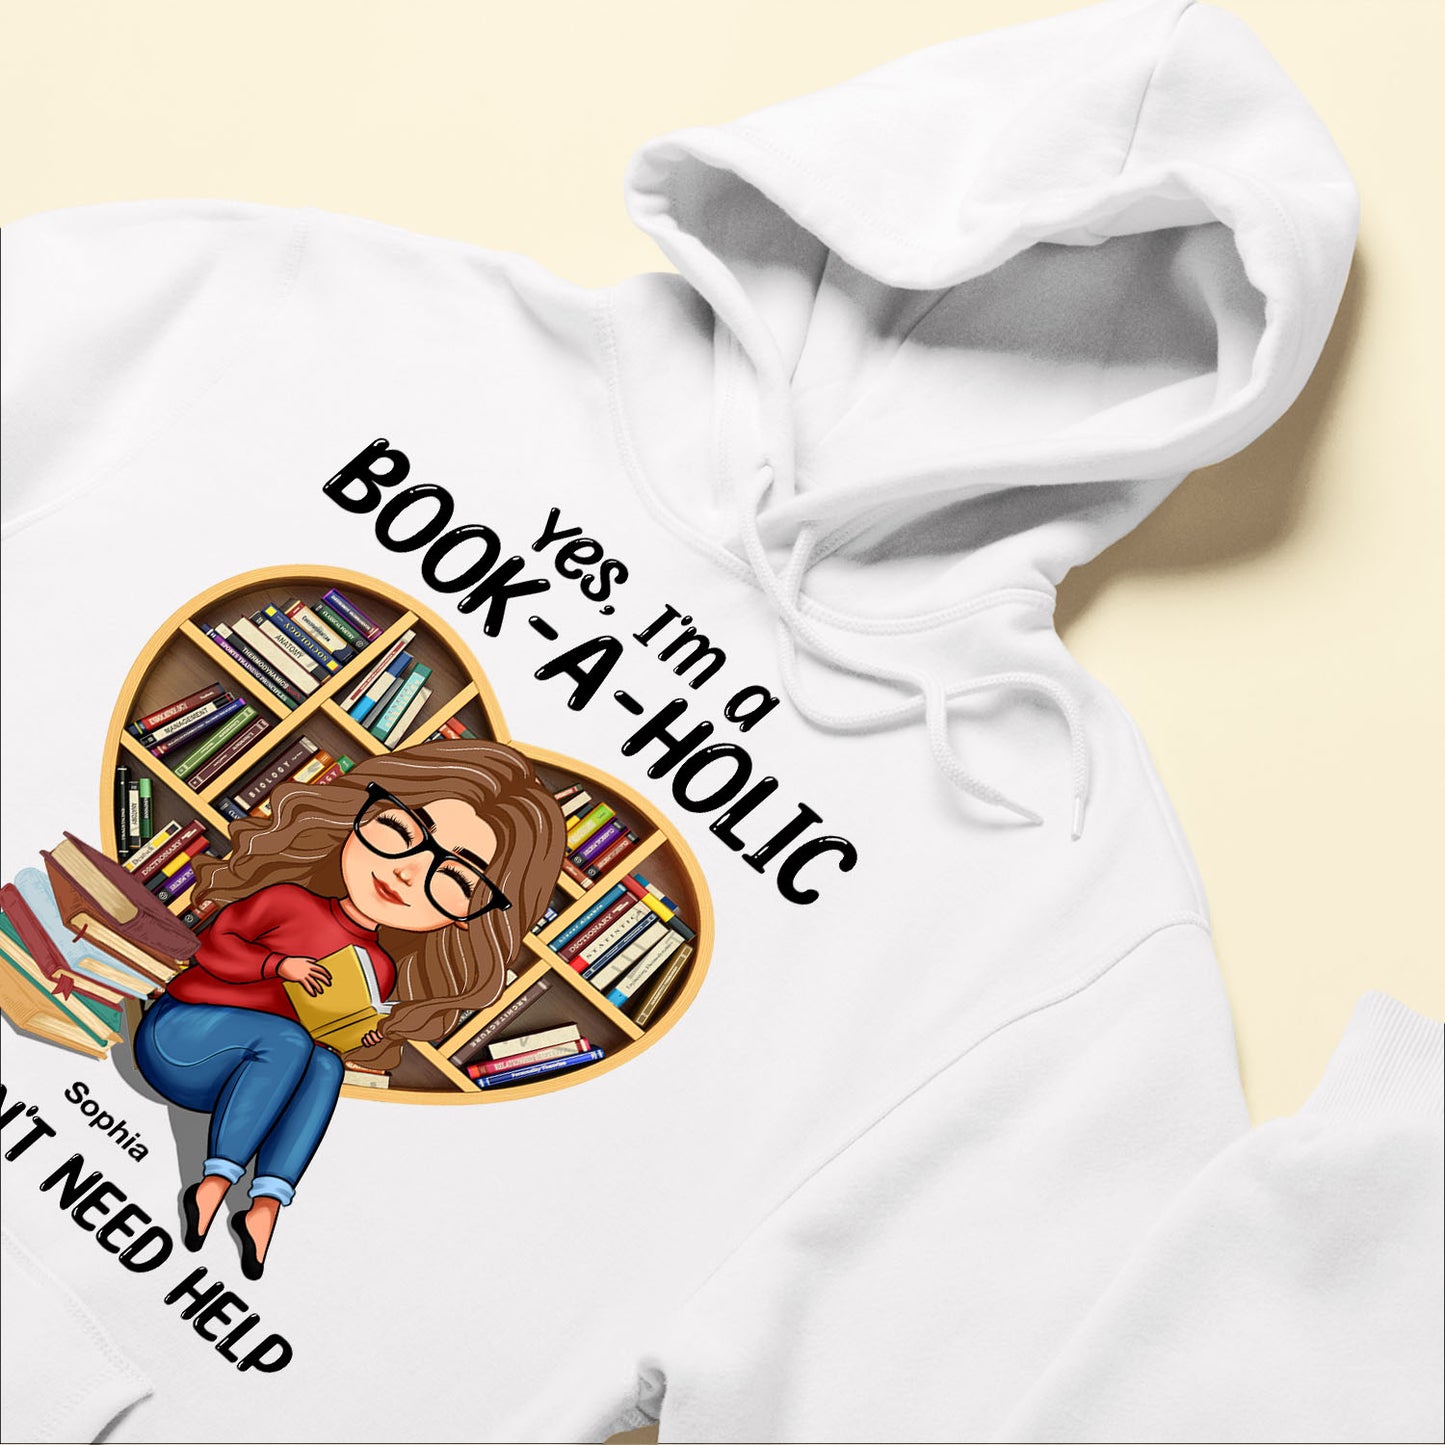 Yes, I'm A Book-A-Holic - Personalized Shirt - Birthday, Loving Gift For Book Lovers, Bookworm